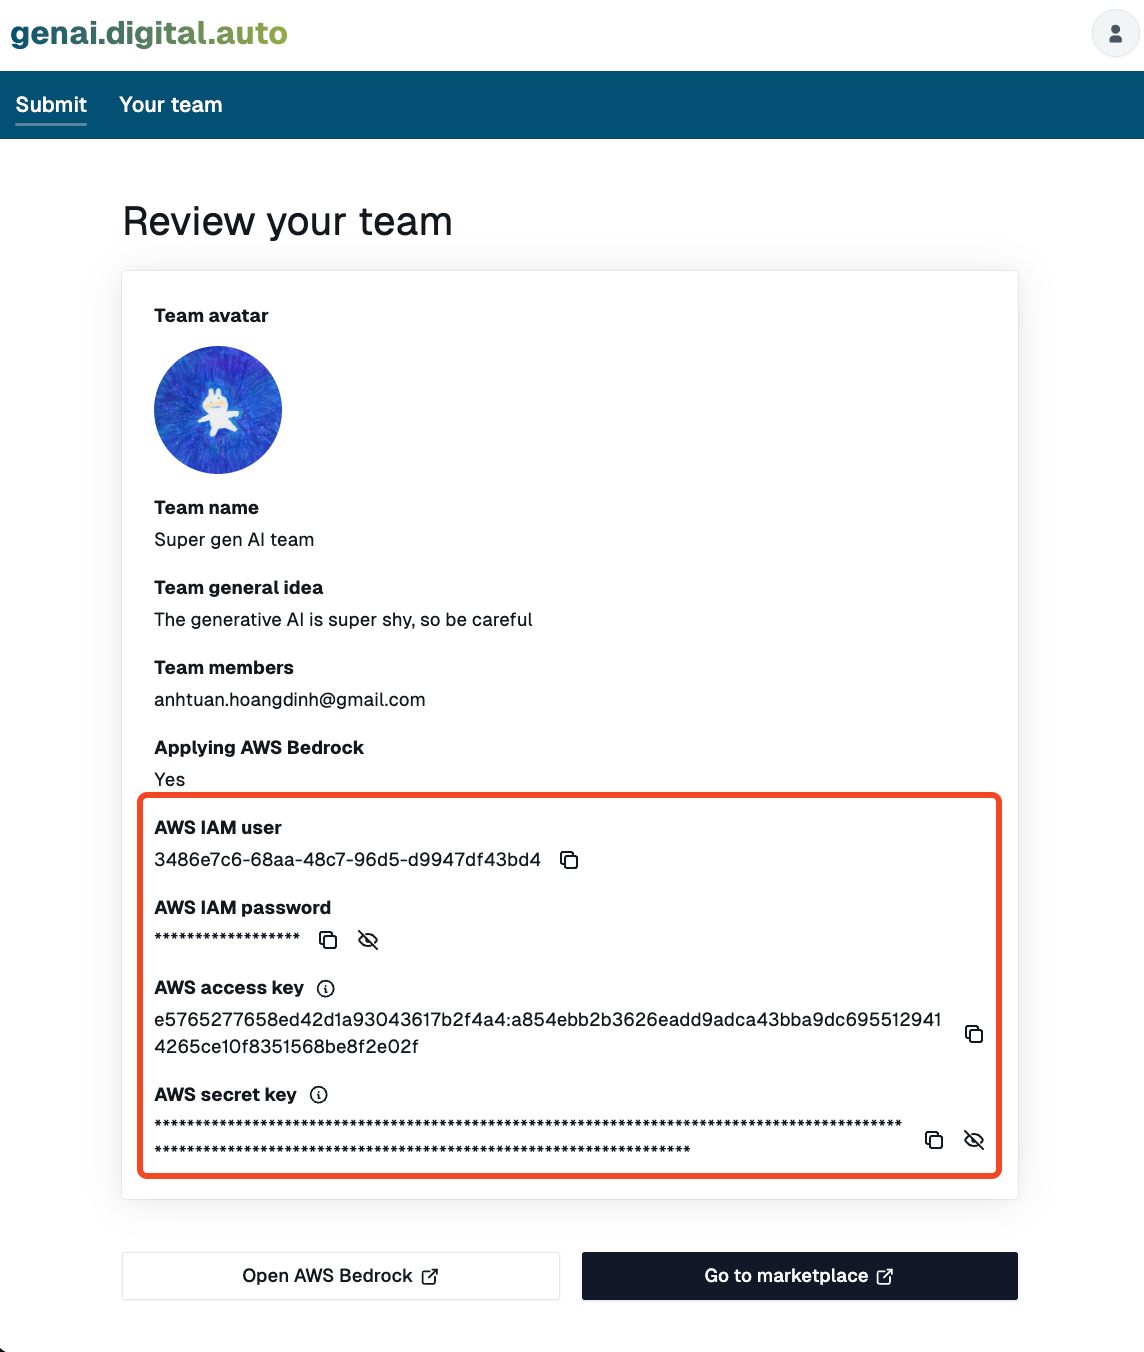 Step 3 - Review your team